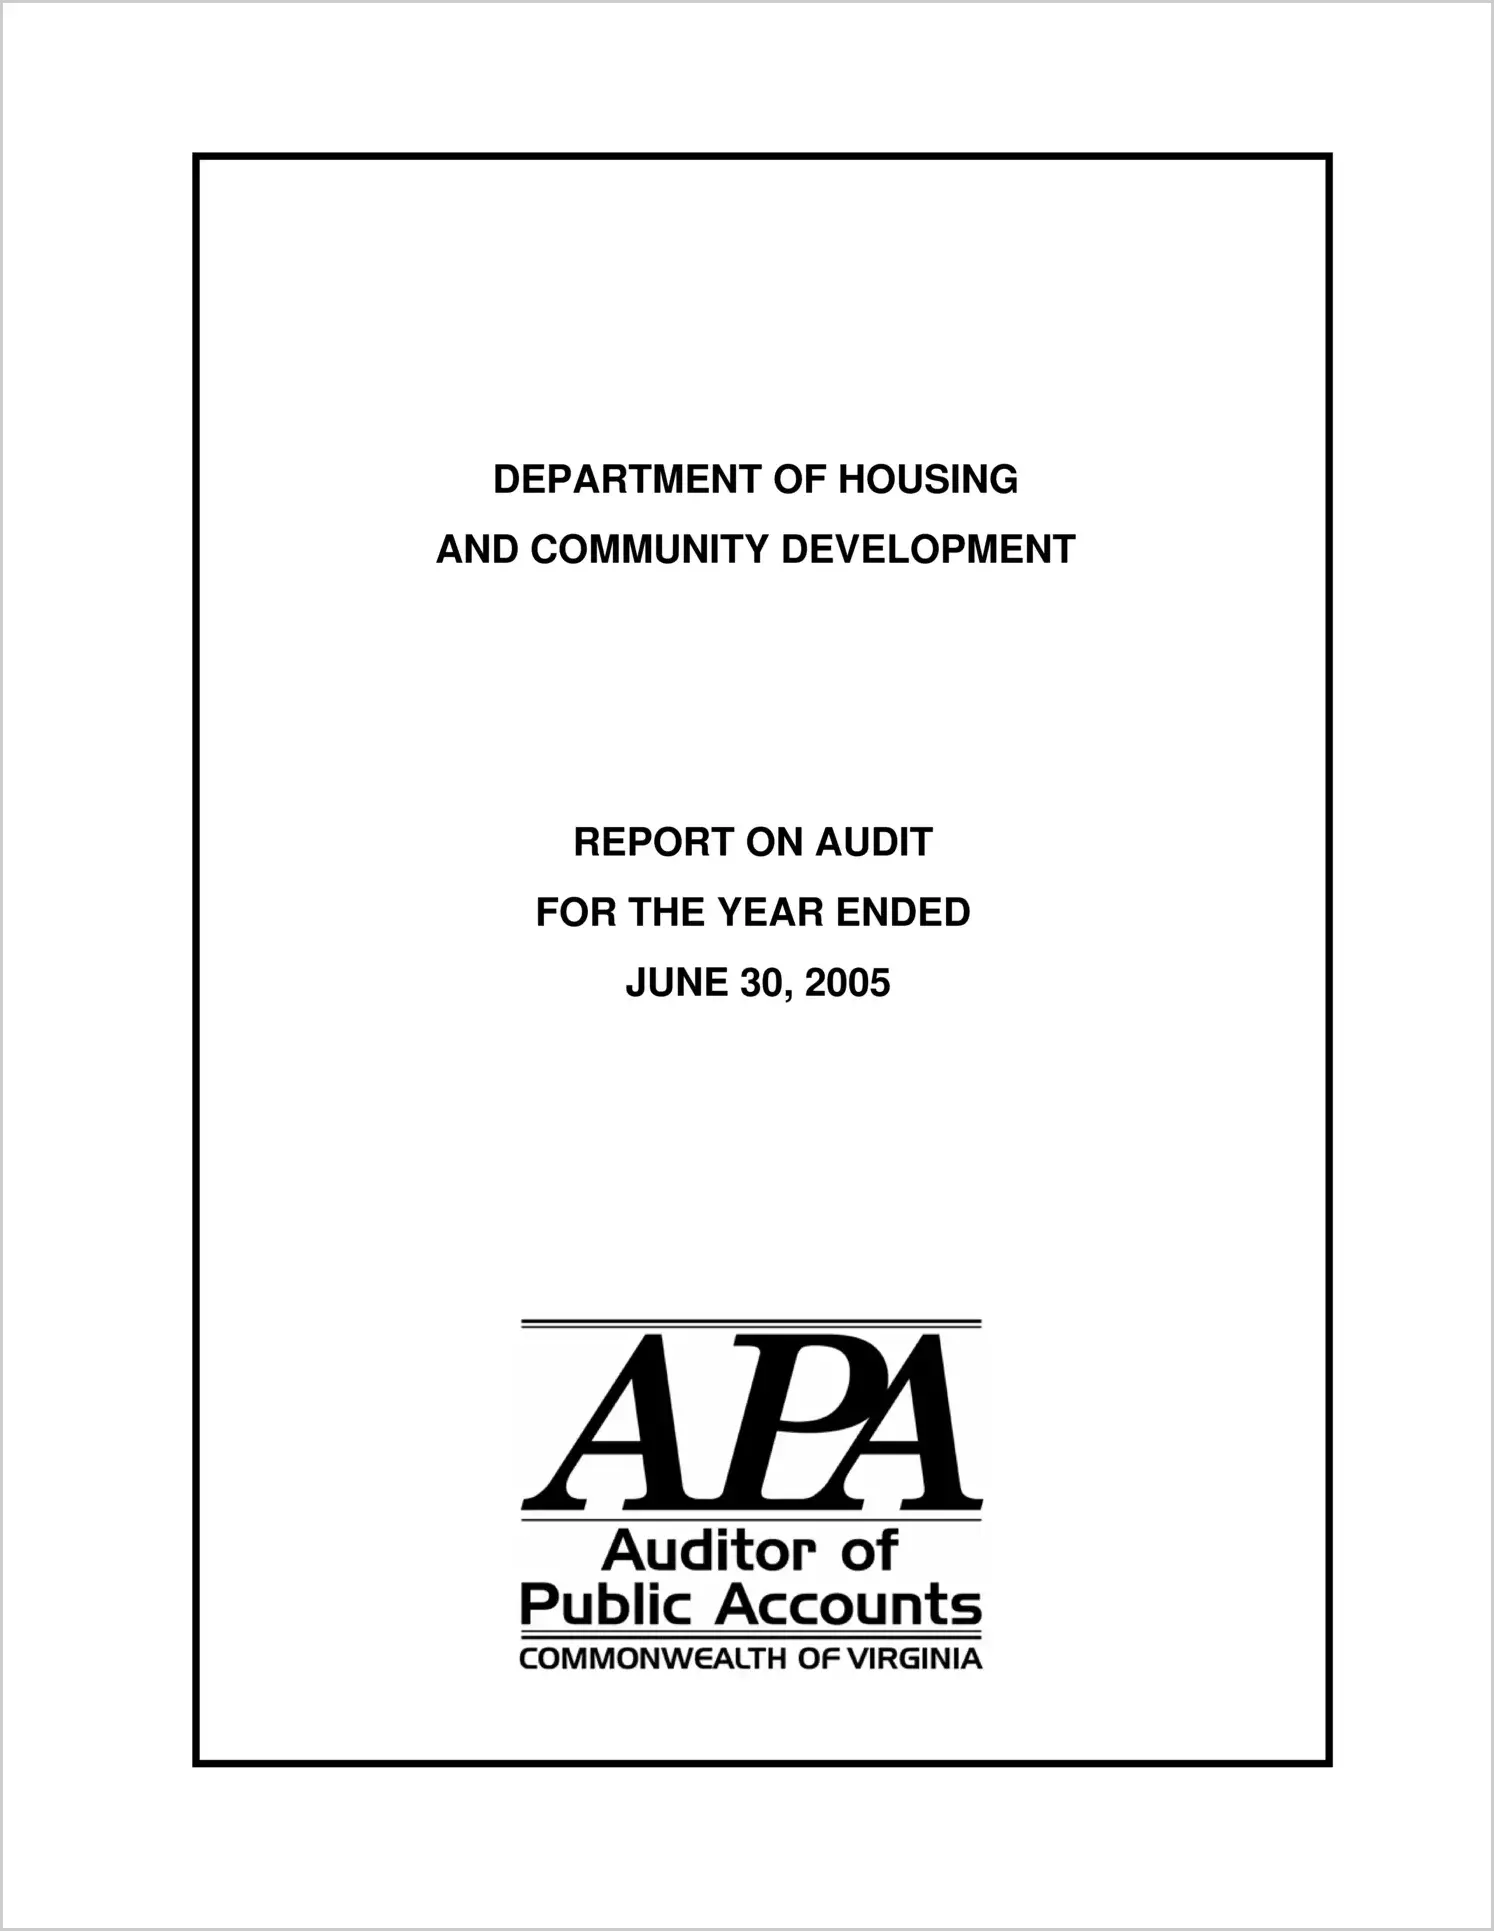 Department of Housing and Community Development for the year ended June 30, 2005